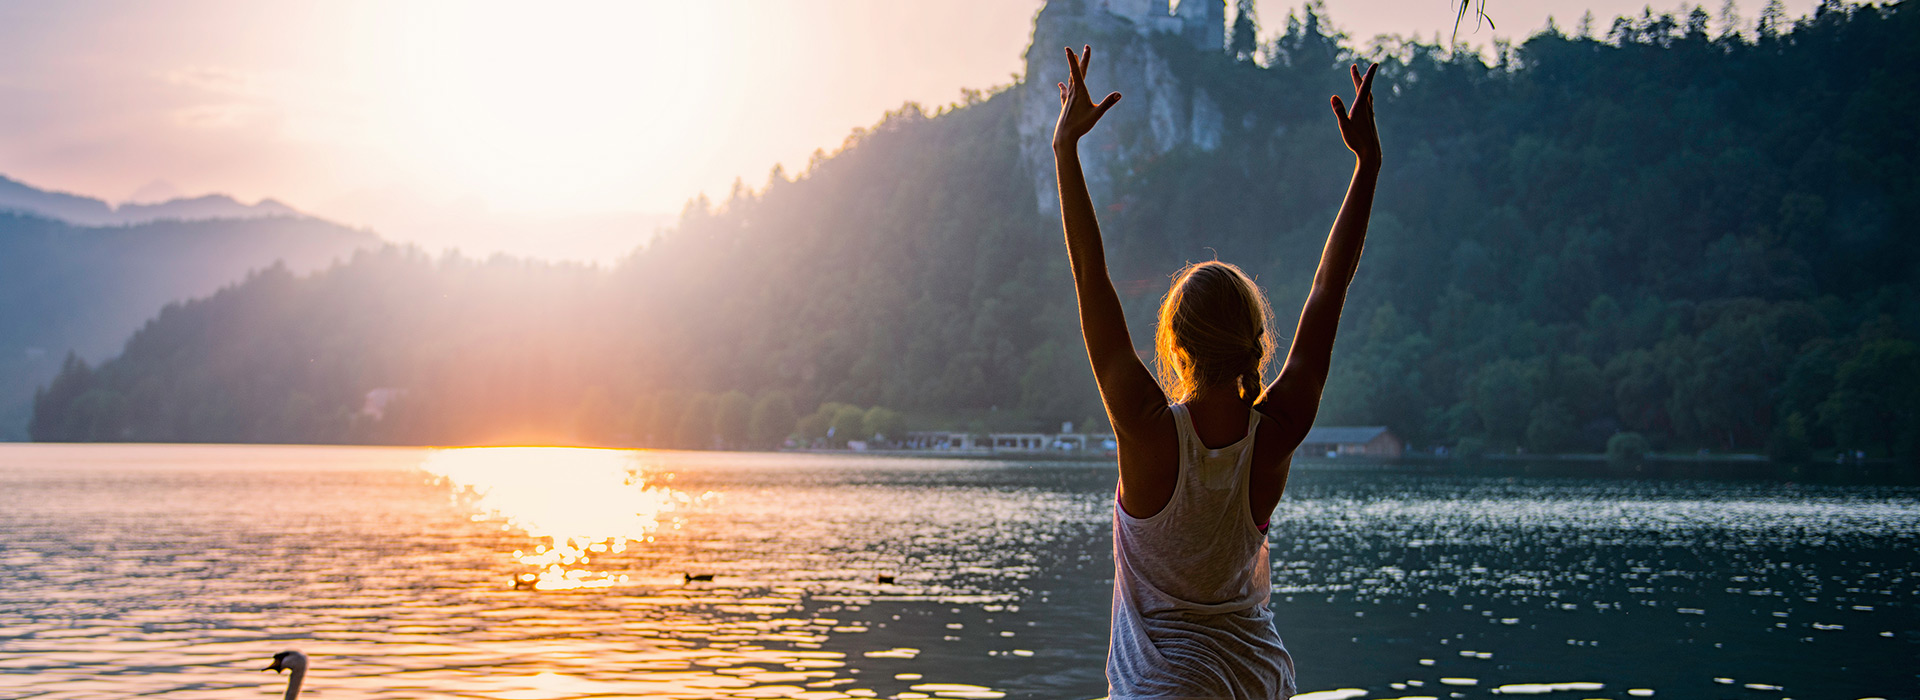 A photo taken behind a woman with both of her arms up towards the sky into a yoga pose in front of lake during the sunset